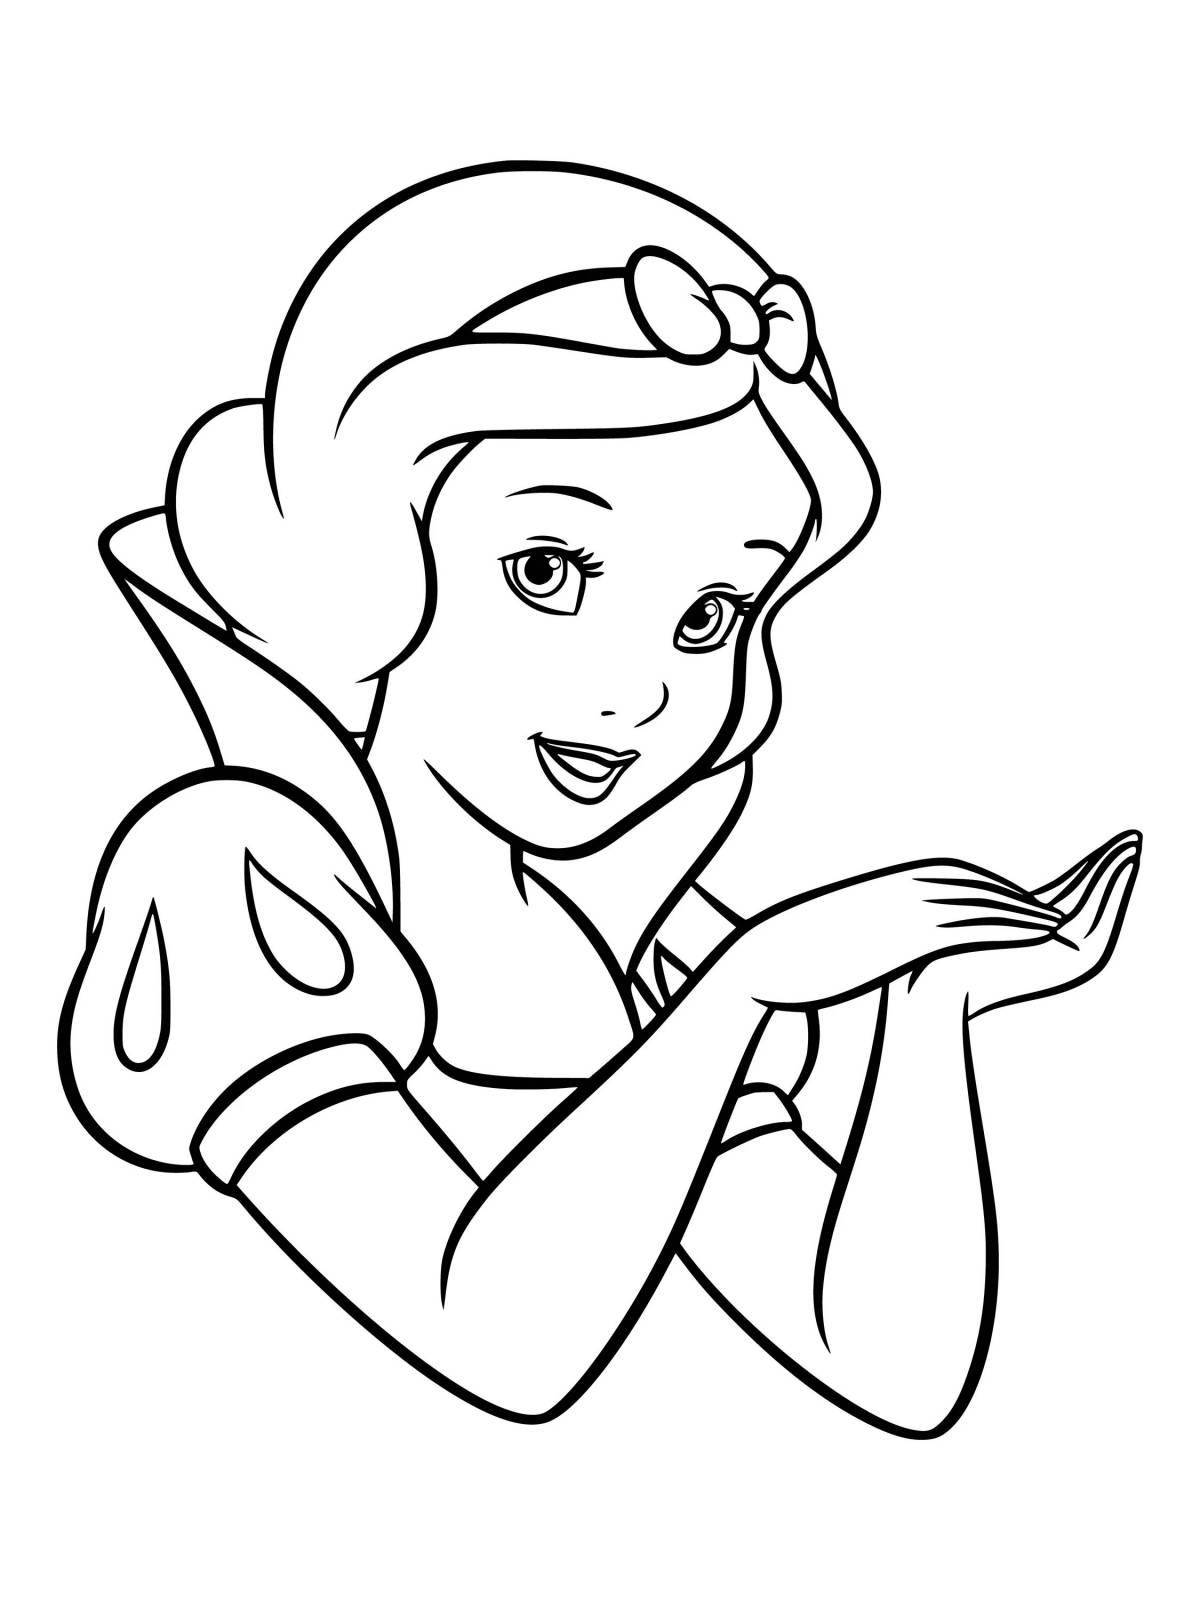 Exciting snow white coloring book for girls